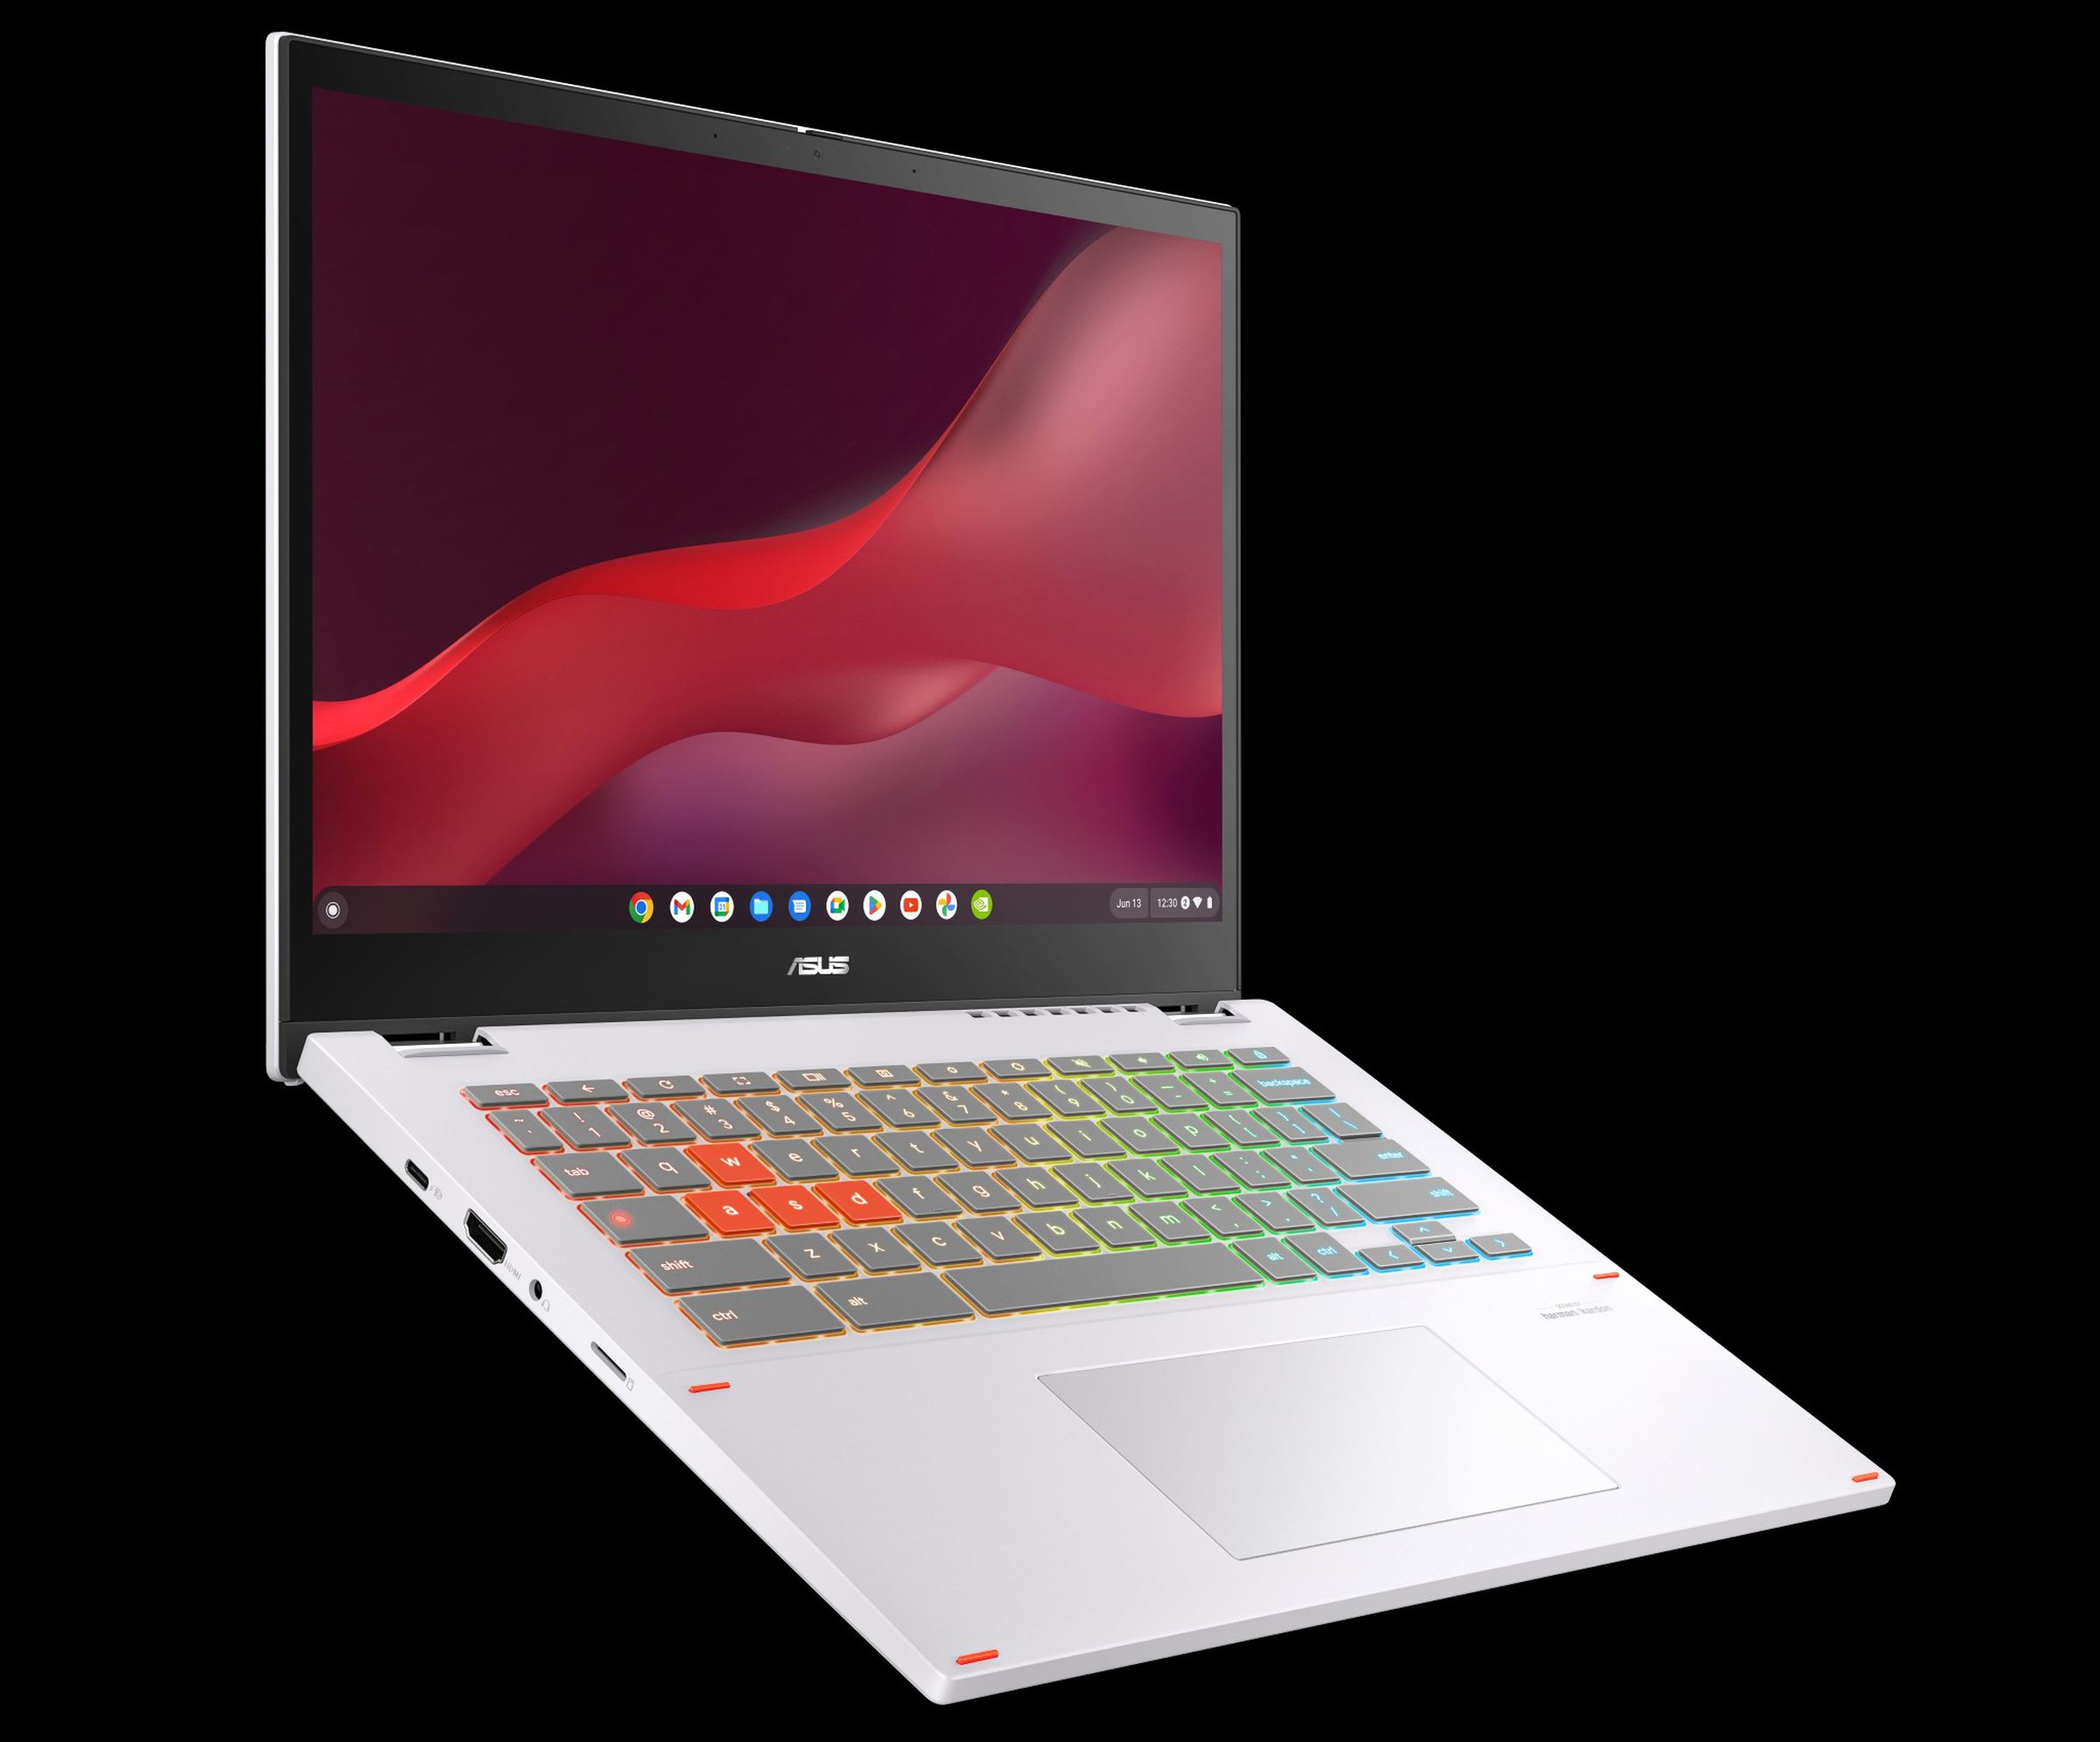 A white laptop with black screen bezel and lit up thin RGB keyboard and orange accents.